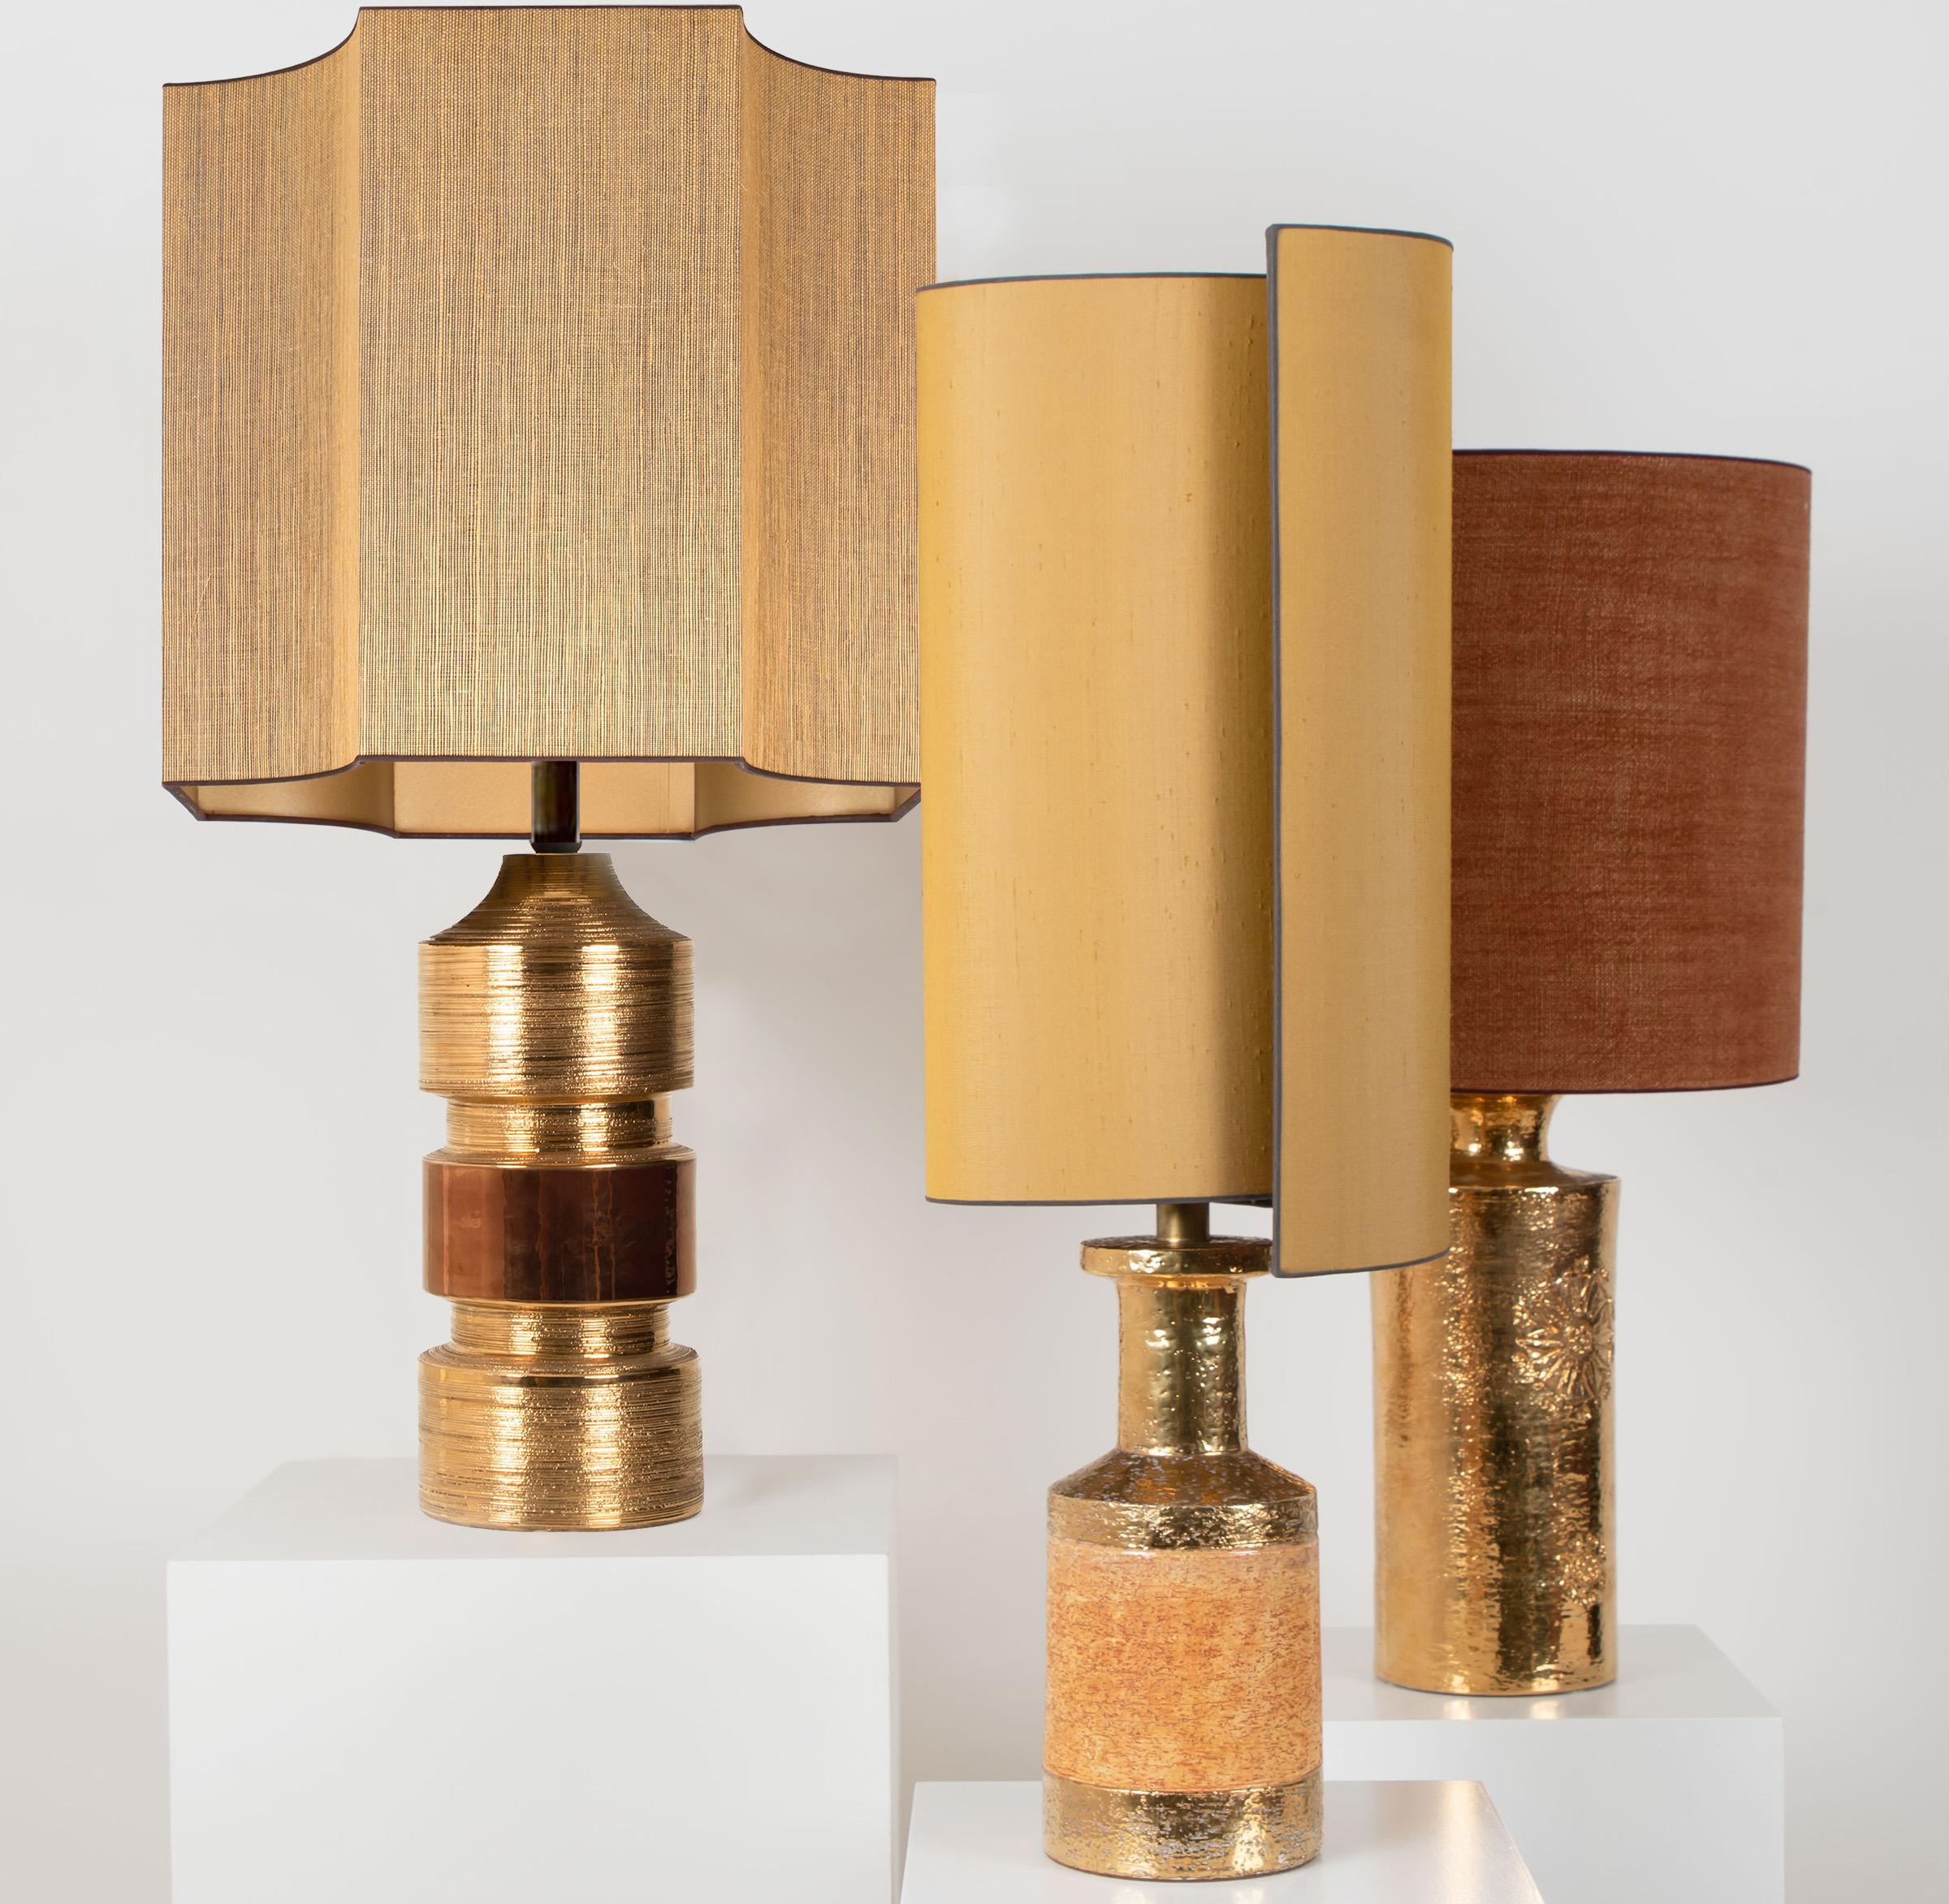 Pair of Bitossi Lamps for Bergboms, with Custom Made Shades by René Houben For Sale 1